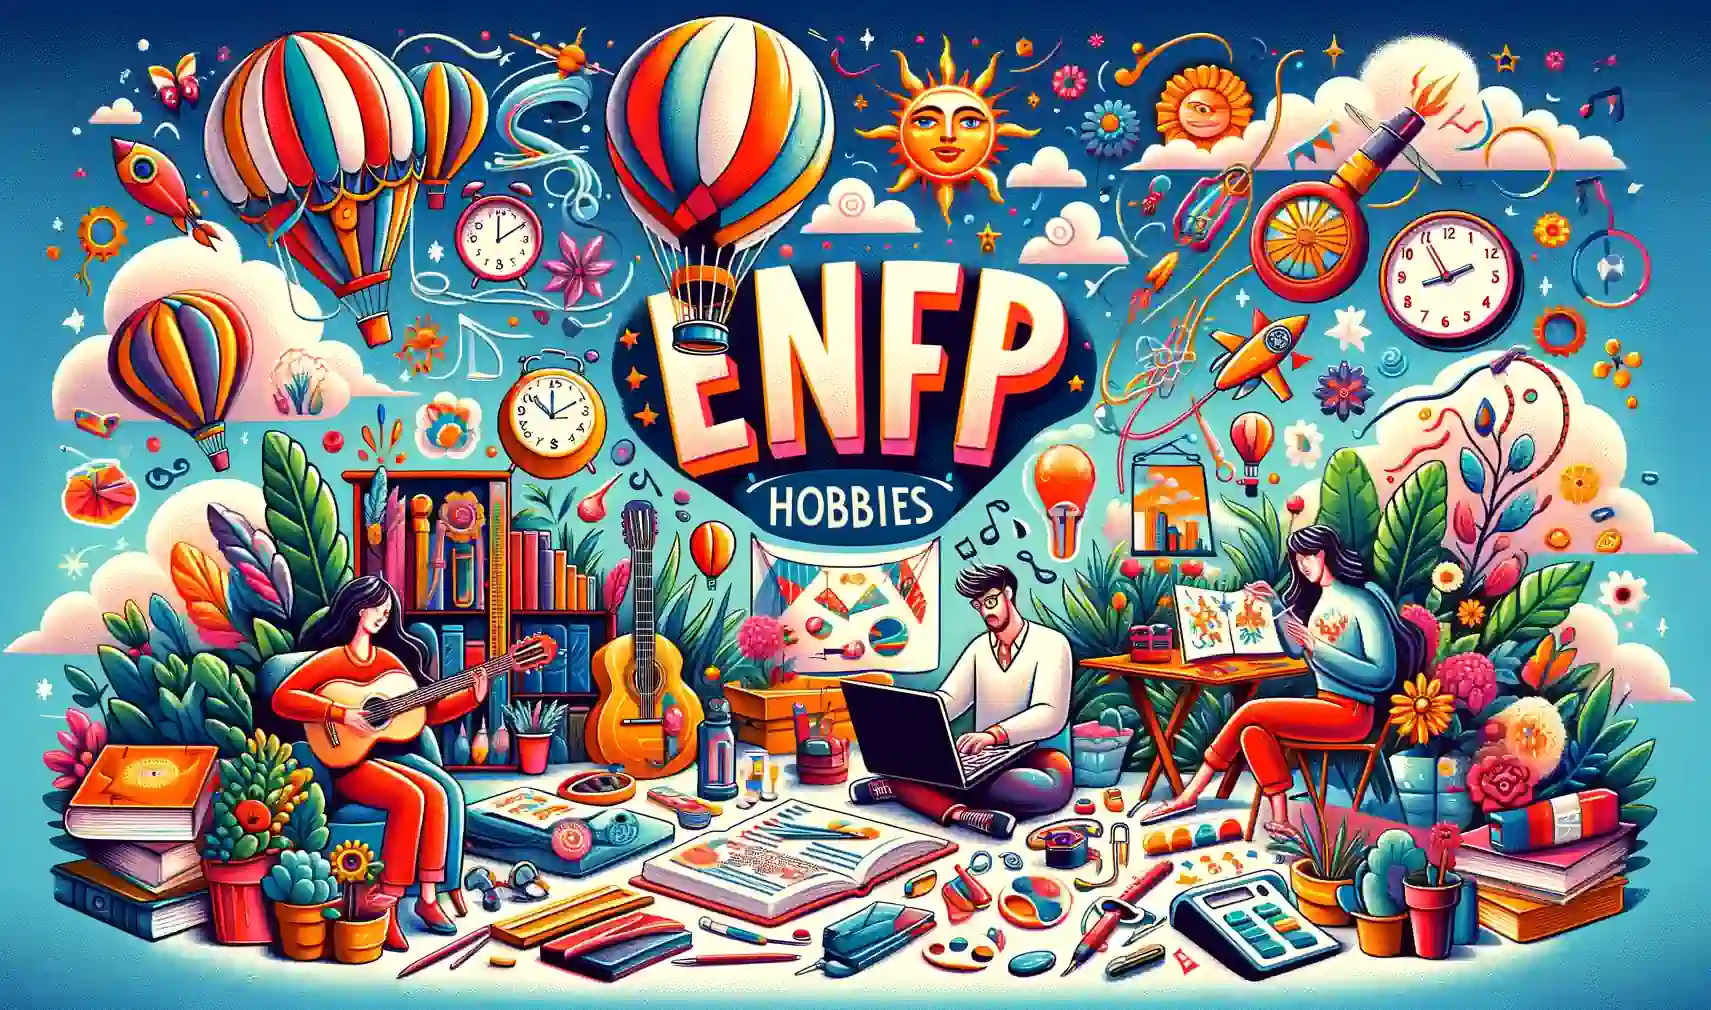 Ultimate ENFP Hobbies That Will Scratch That Itch